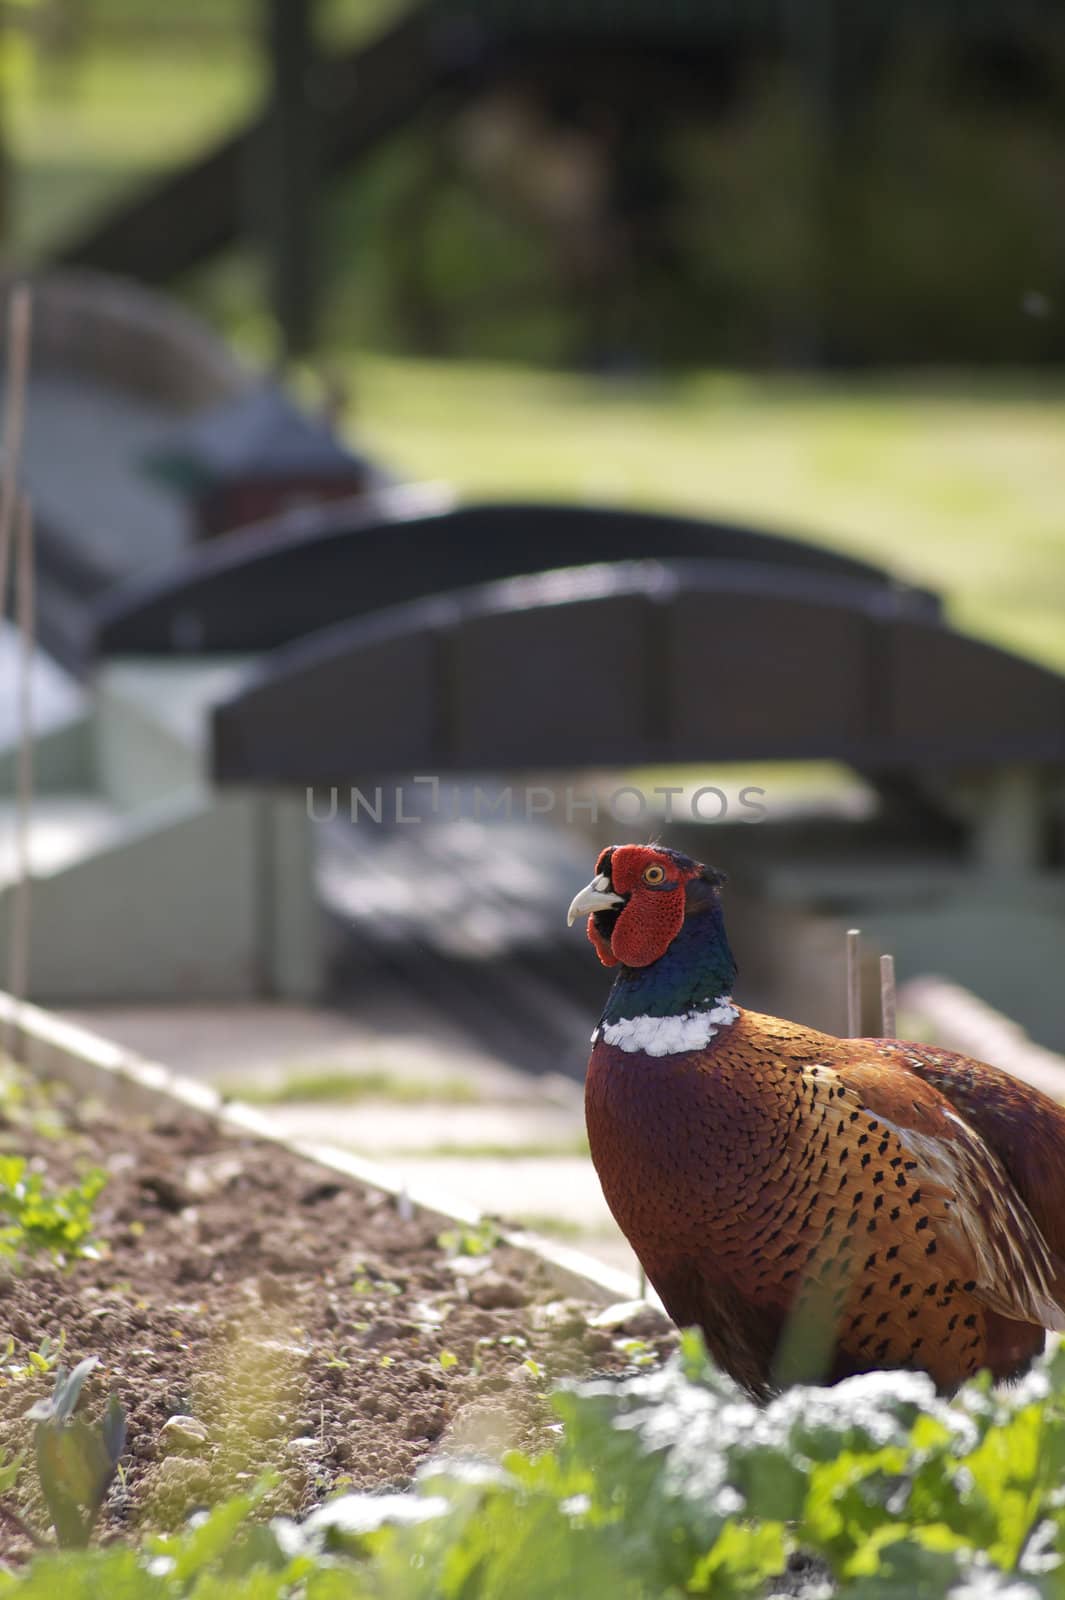 A cock pheasant in a rural countryside vegetable garden in Devon England. The phesant is running amongst freshly sprouting vegetable leafs.